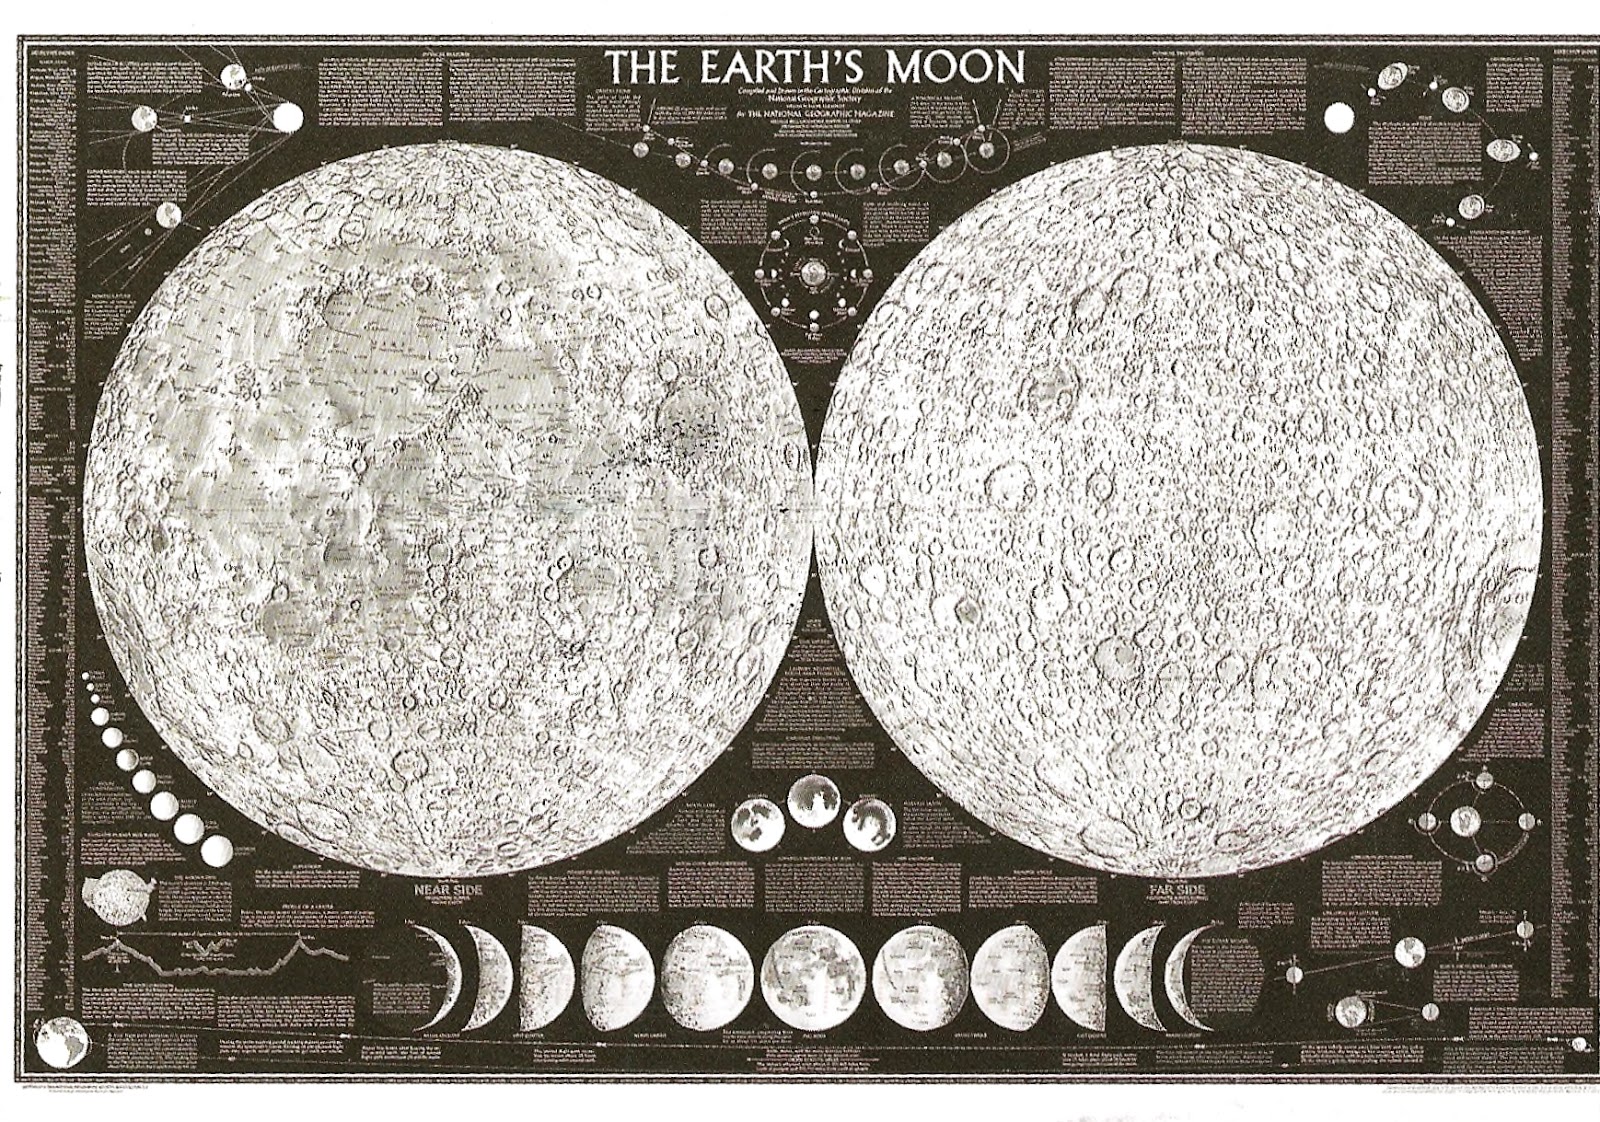 My Favorite Postcards The Far Side And Near Side Of The Moon